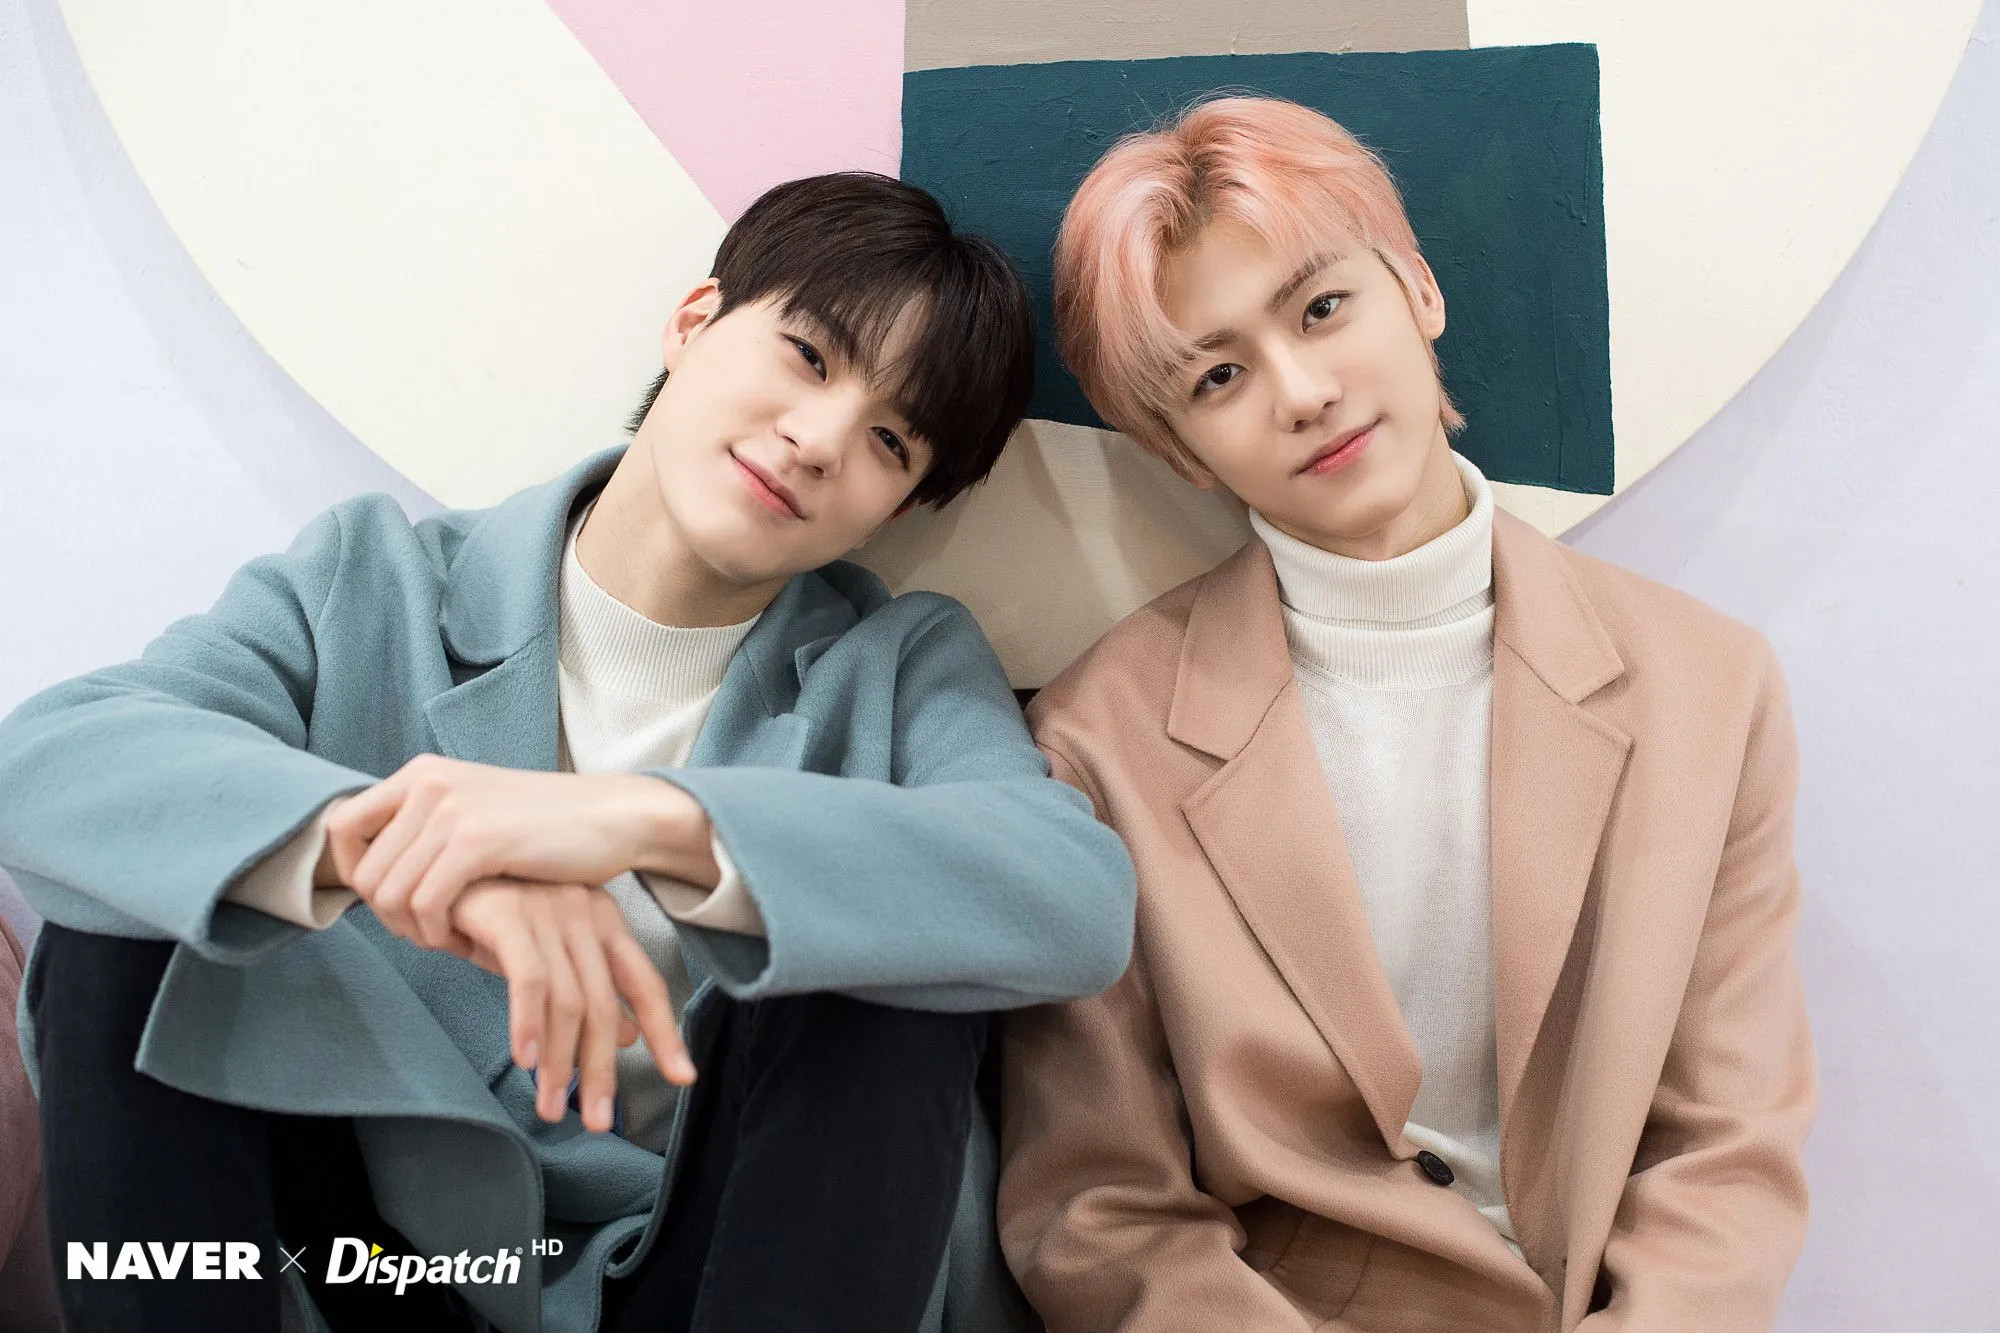 200113 Nct Dream S Jaemin And Jeno Photoshoot By Naver X Dispatch Kpopping